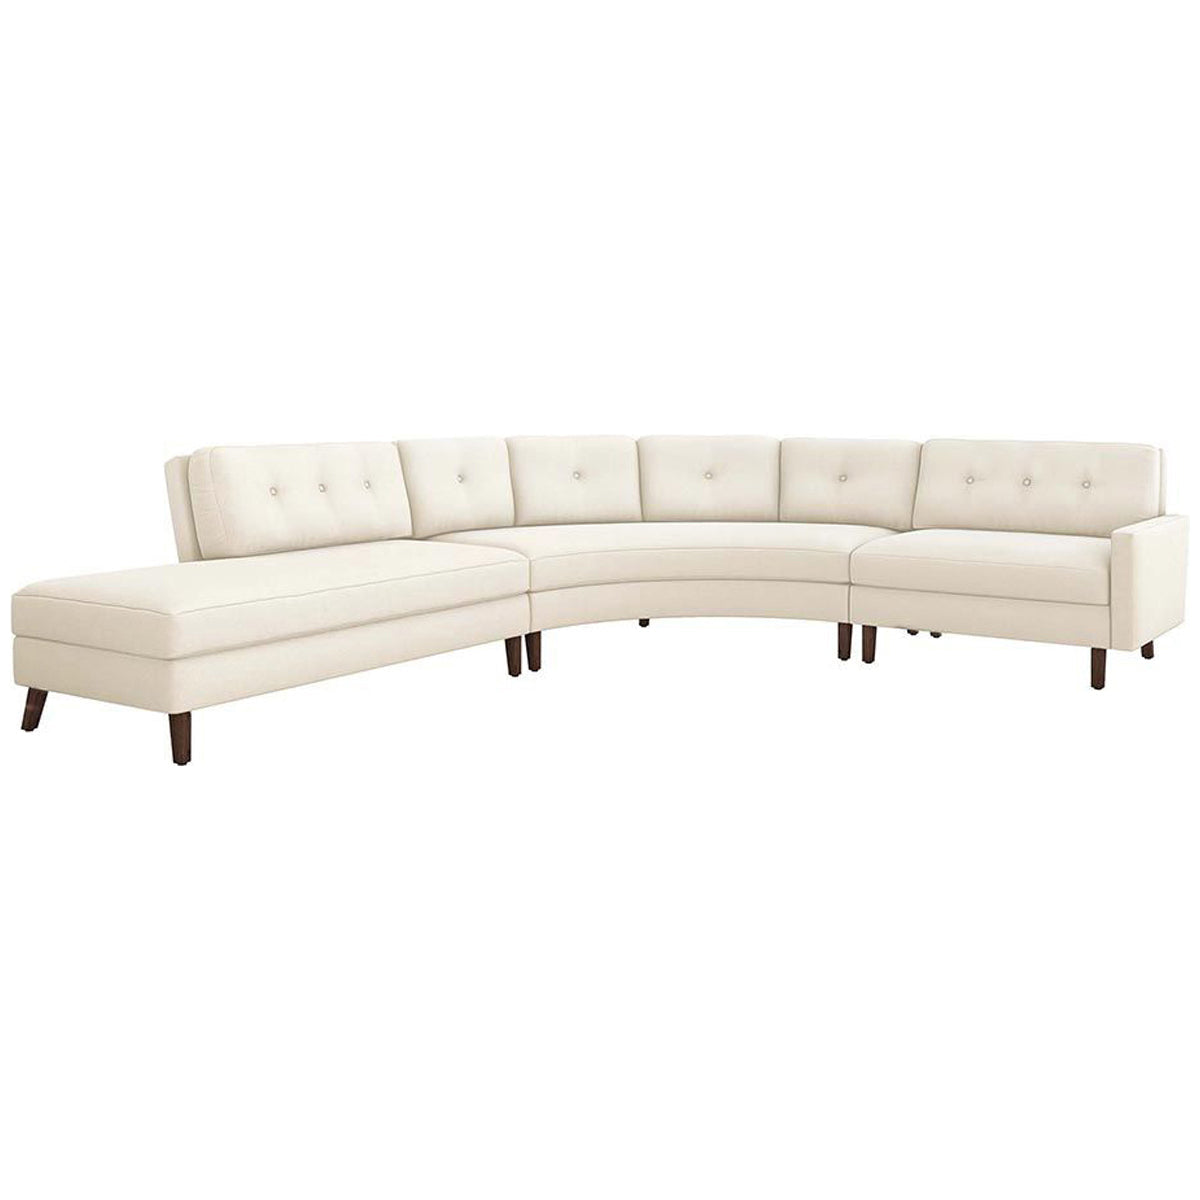 Interlude Home Aventura Chaise 3-Piece Sectional - Pure